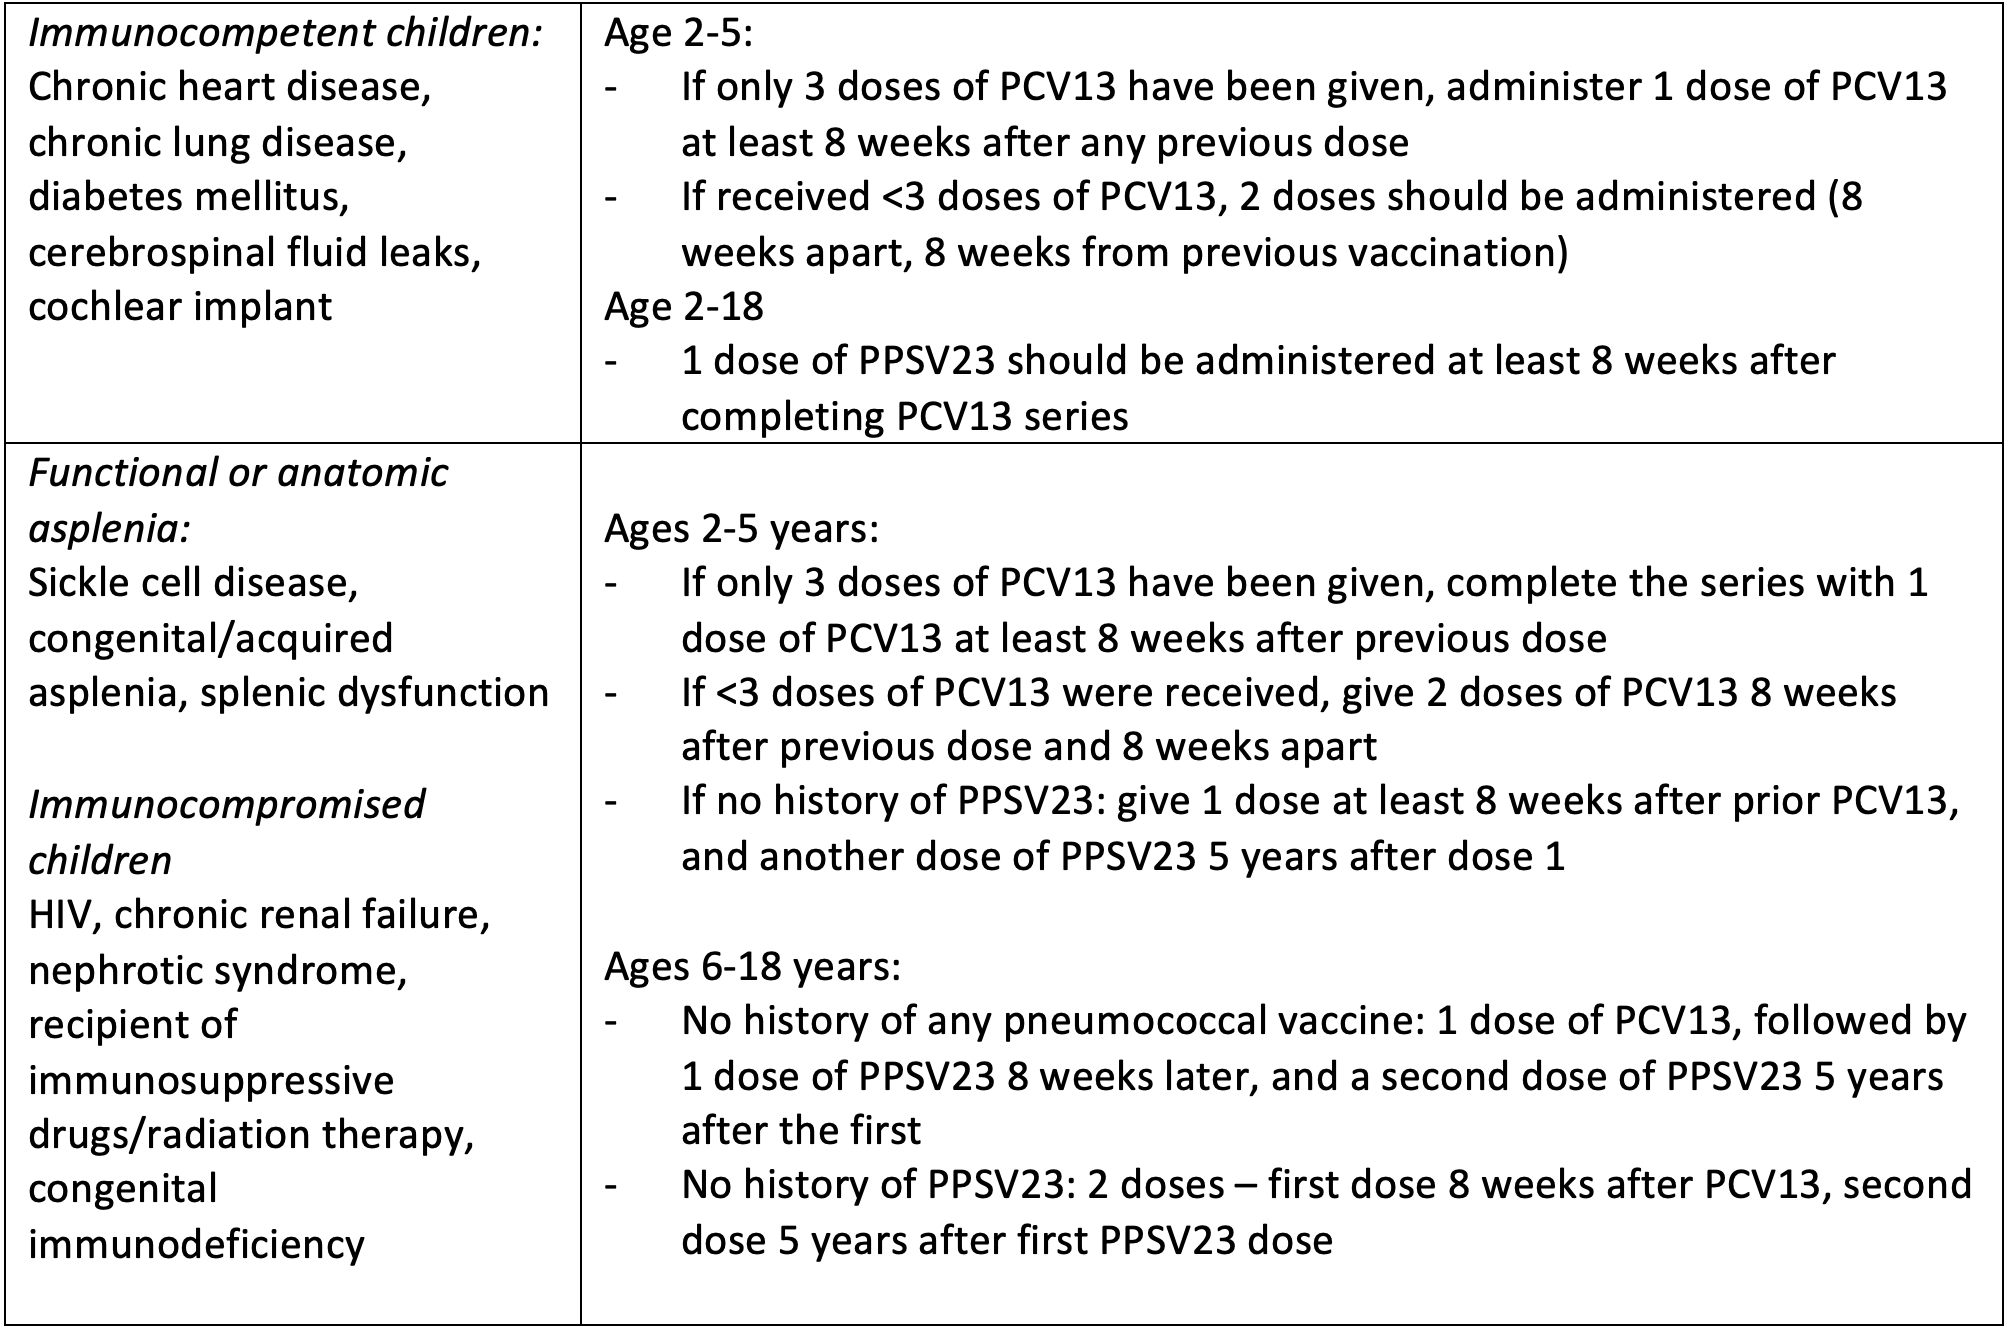 Table 1: Pneumococcal vaccination recommendations in children